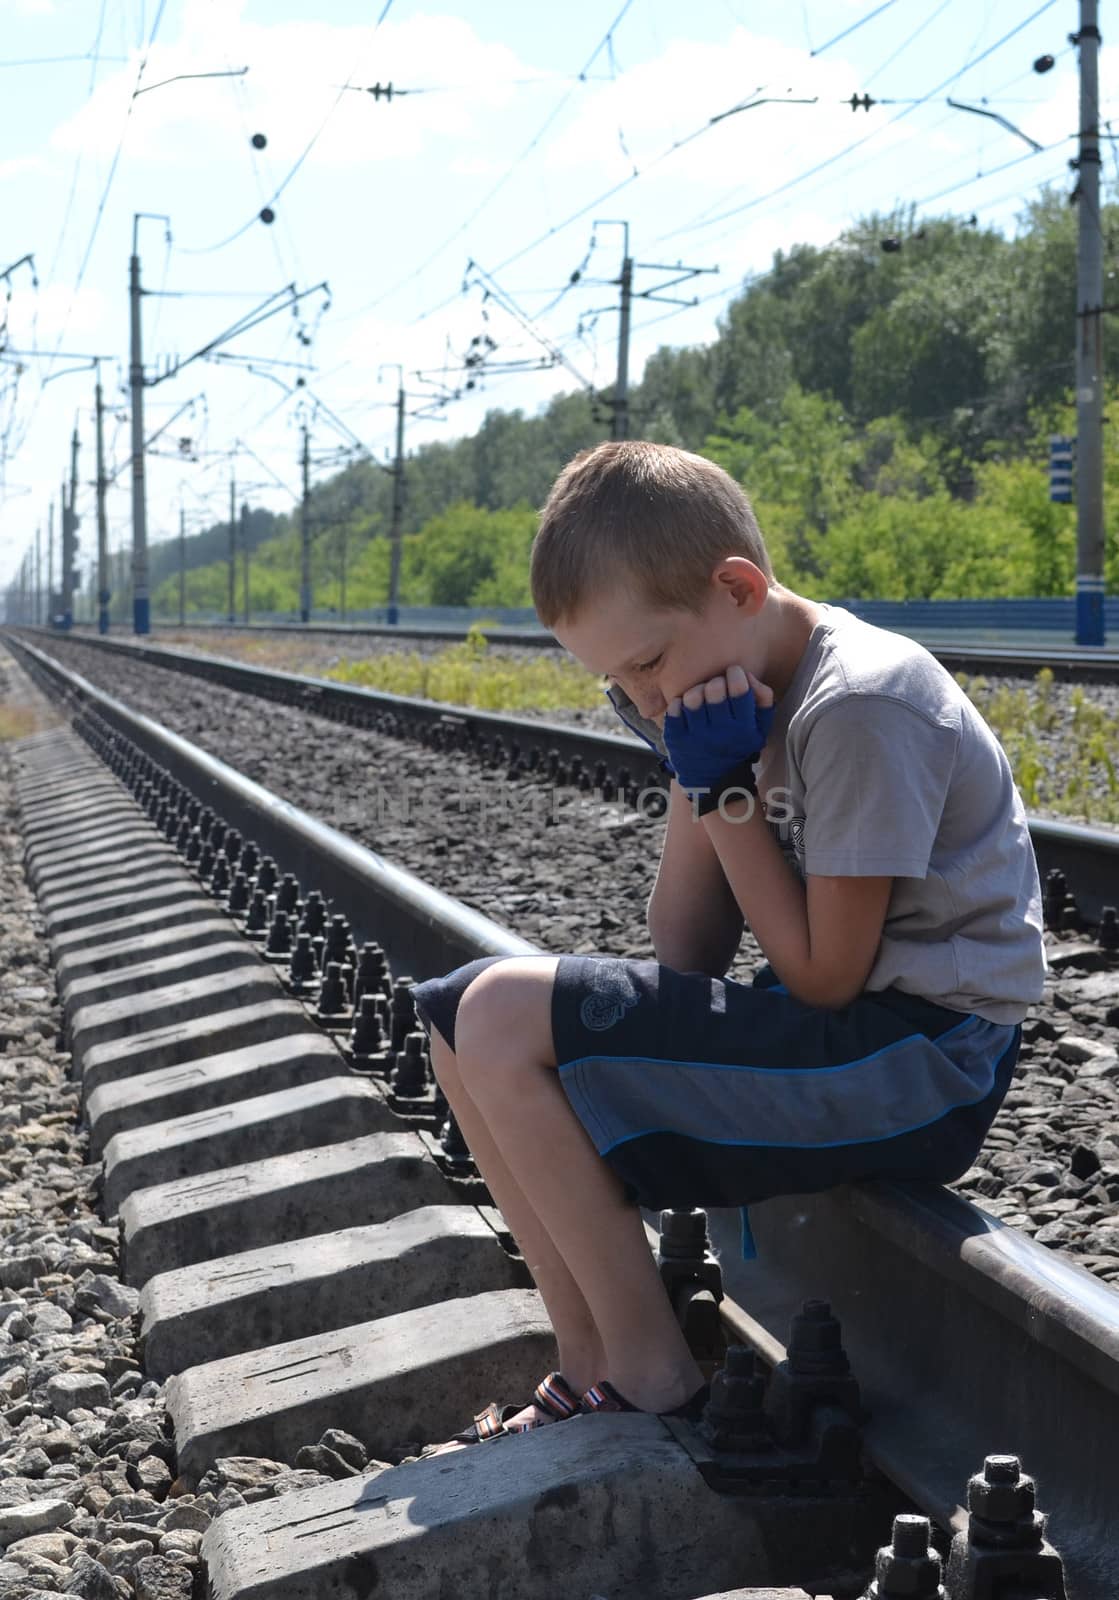 the sad boy sits on rails, having clasped the head hands